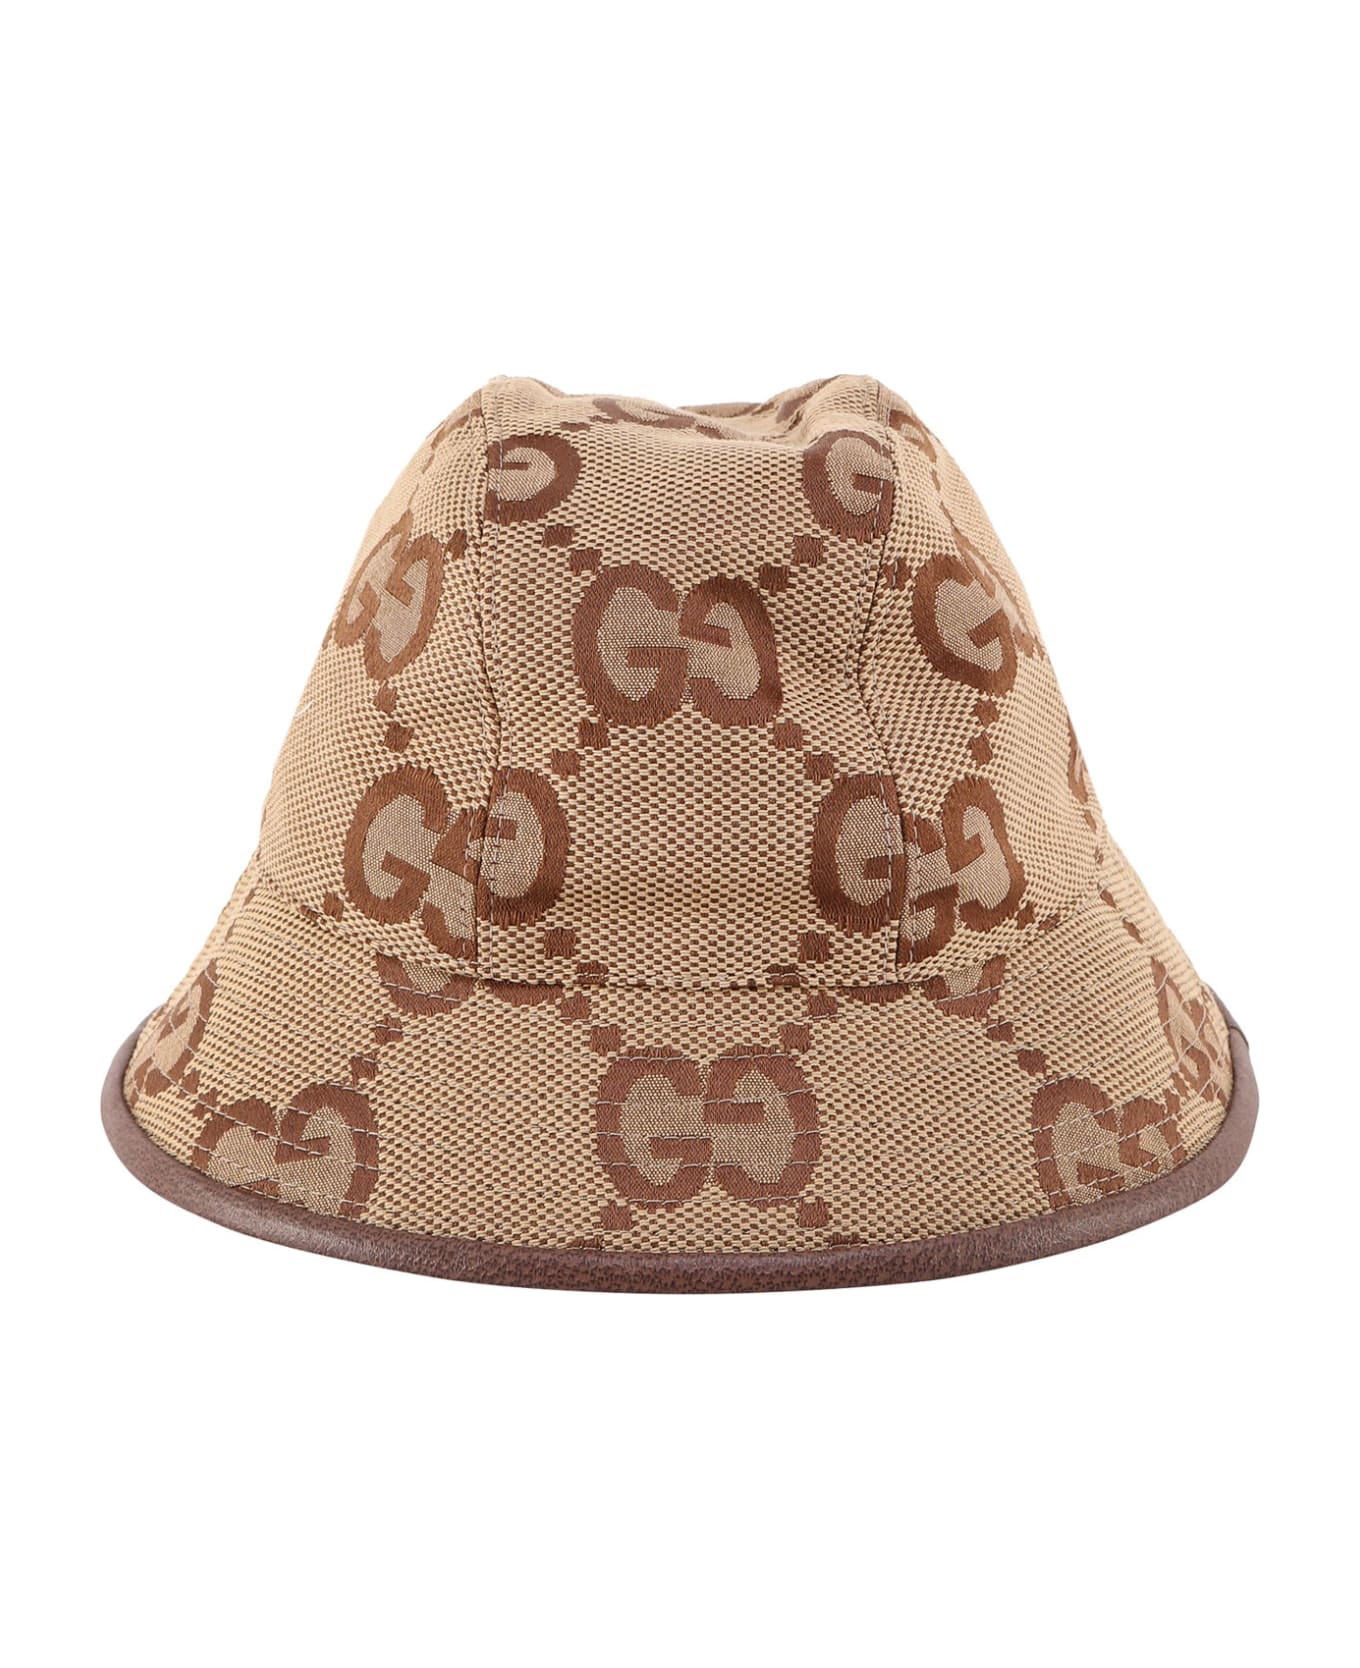 Gucci Embroidered Cotton Blend Hat - Brown